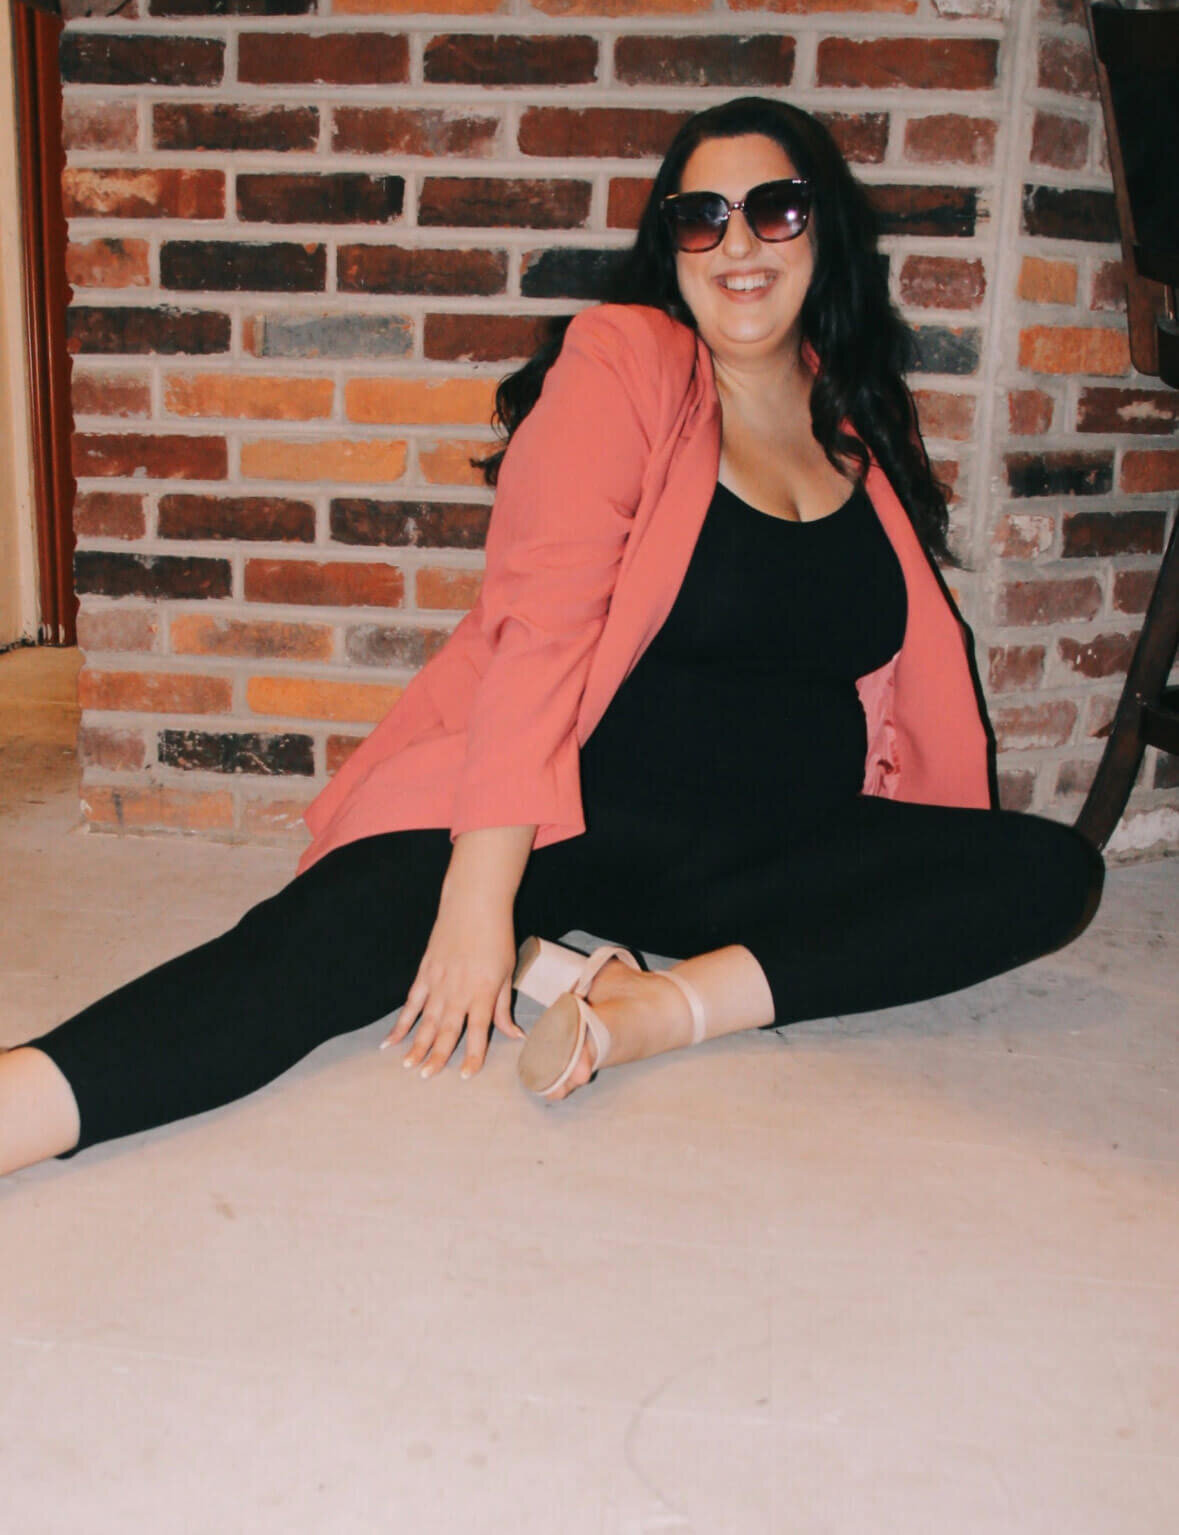 Tiktok and Instagram mentor, Sarah Weiss sitting against a brick wall, wearing a pink blazer and sunglasses